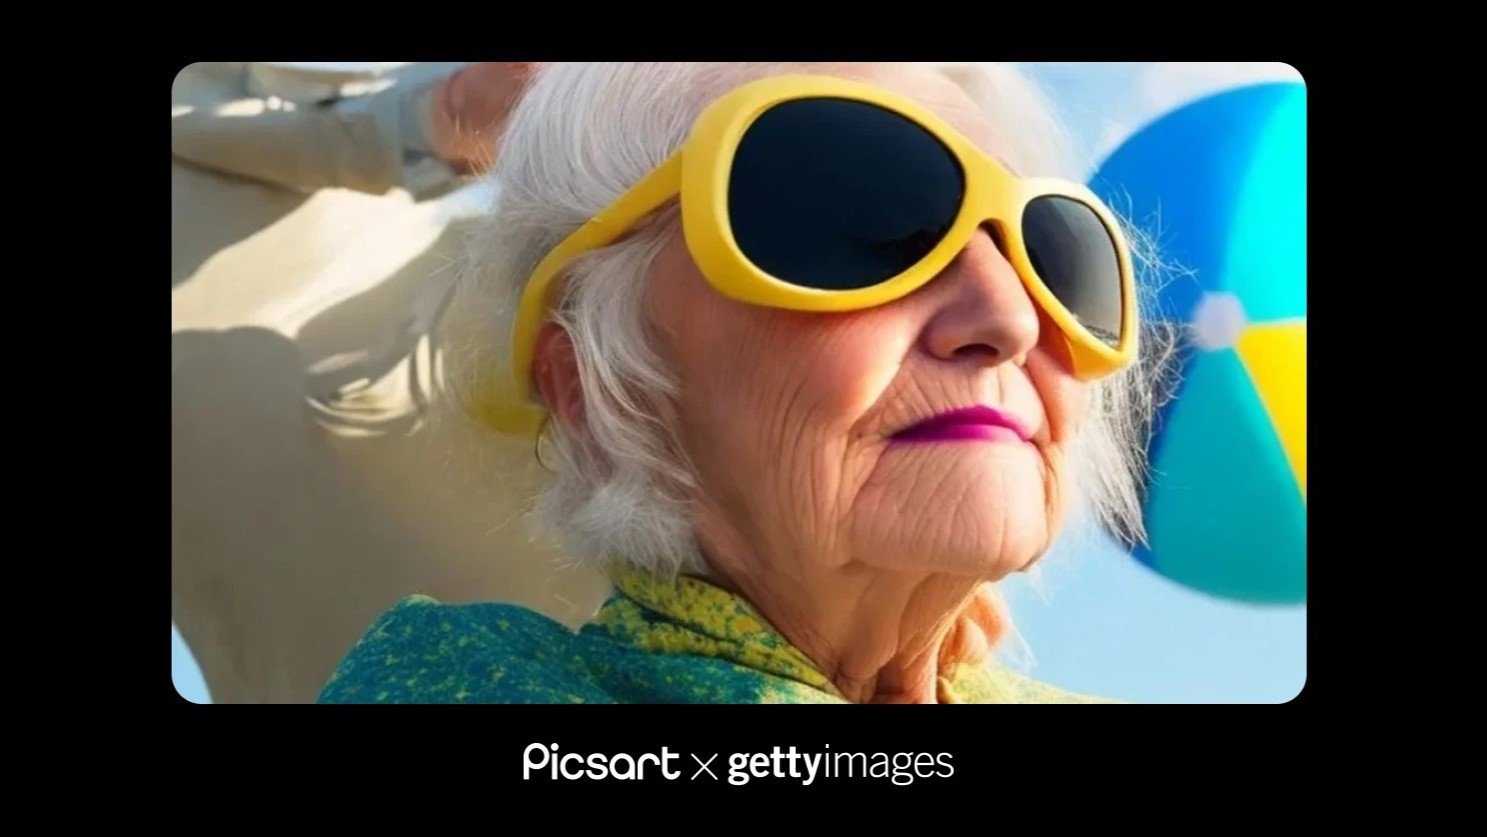 Picsart partners with Getty Images to offer AI art for commercial use